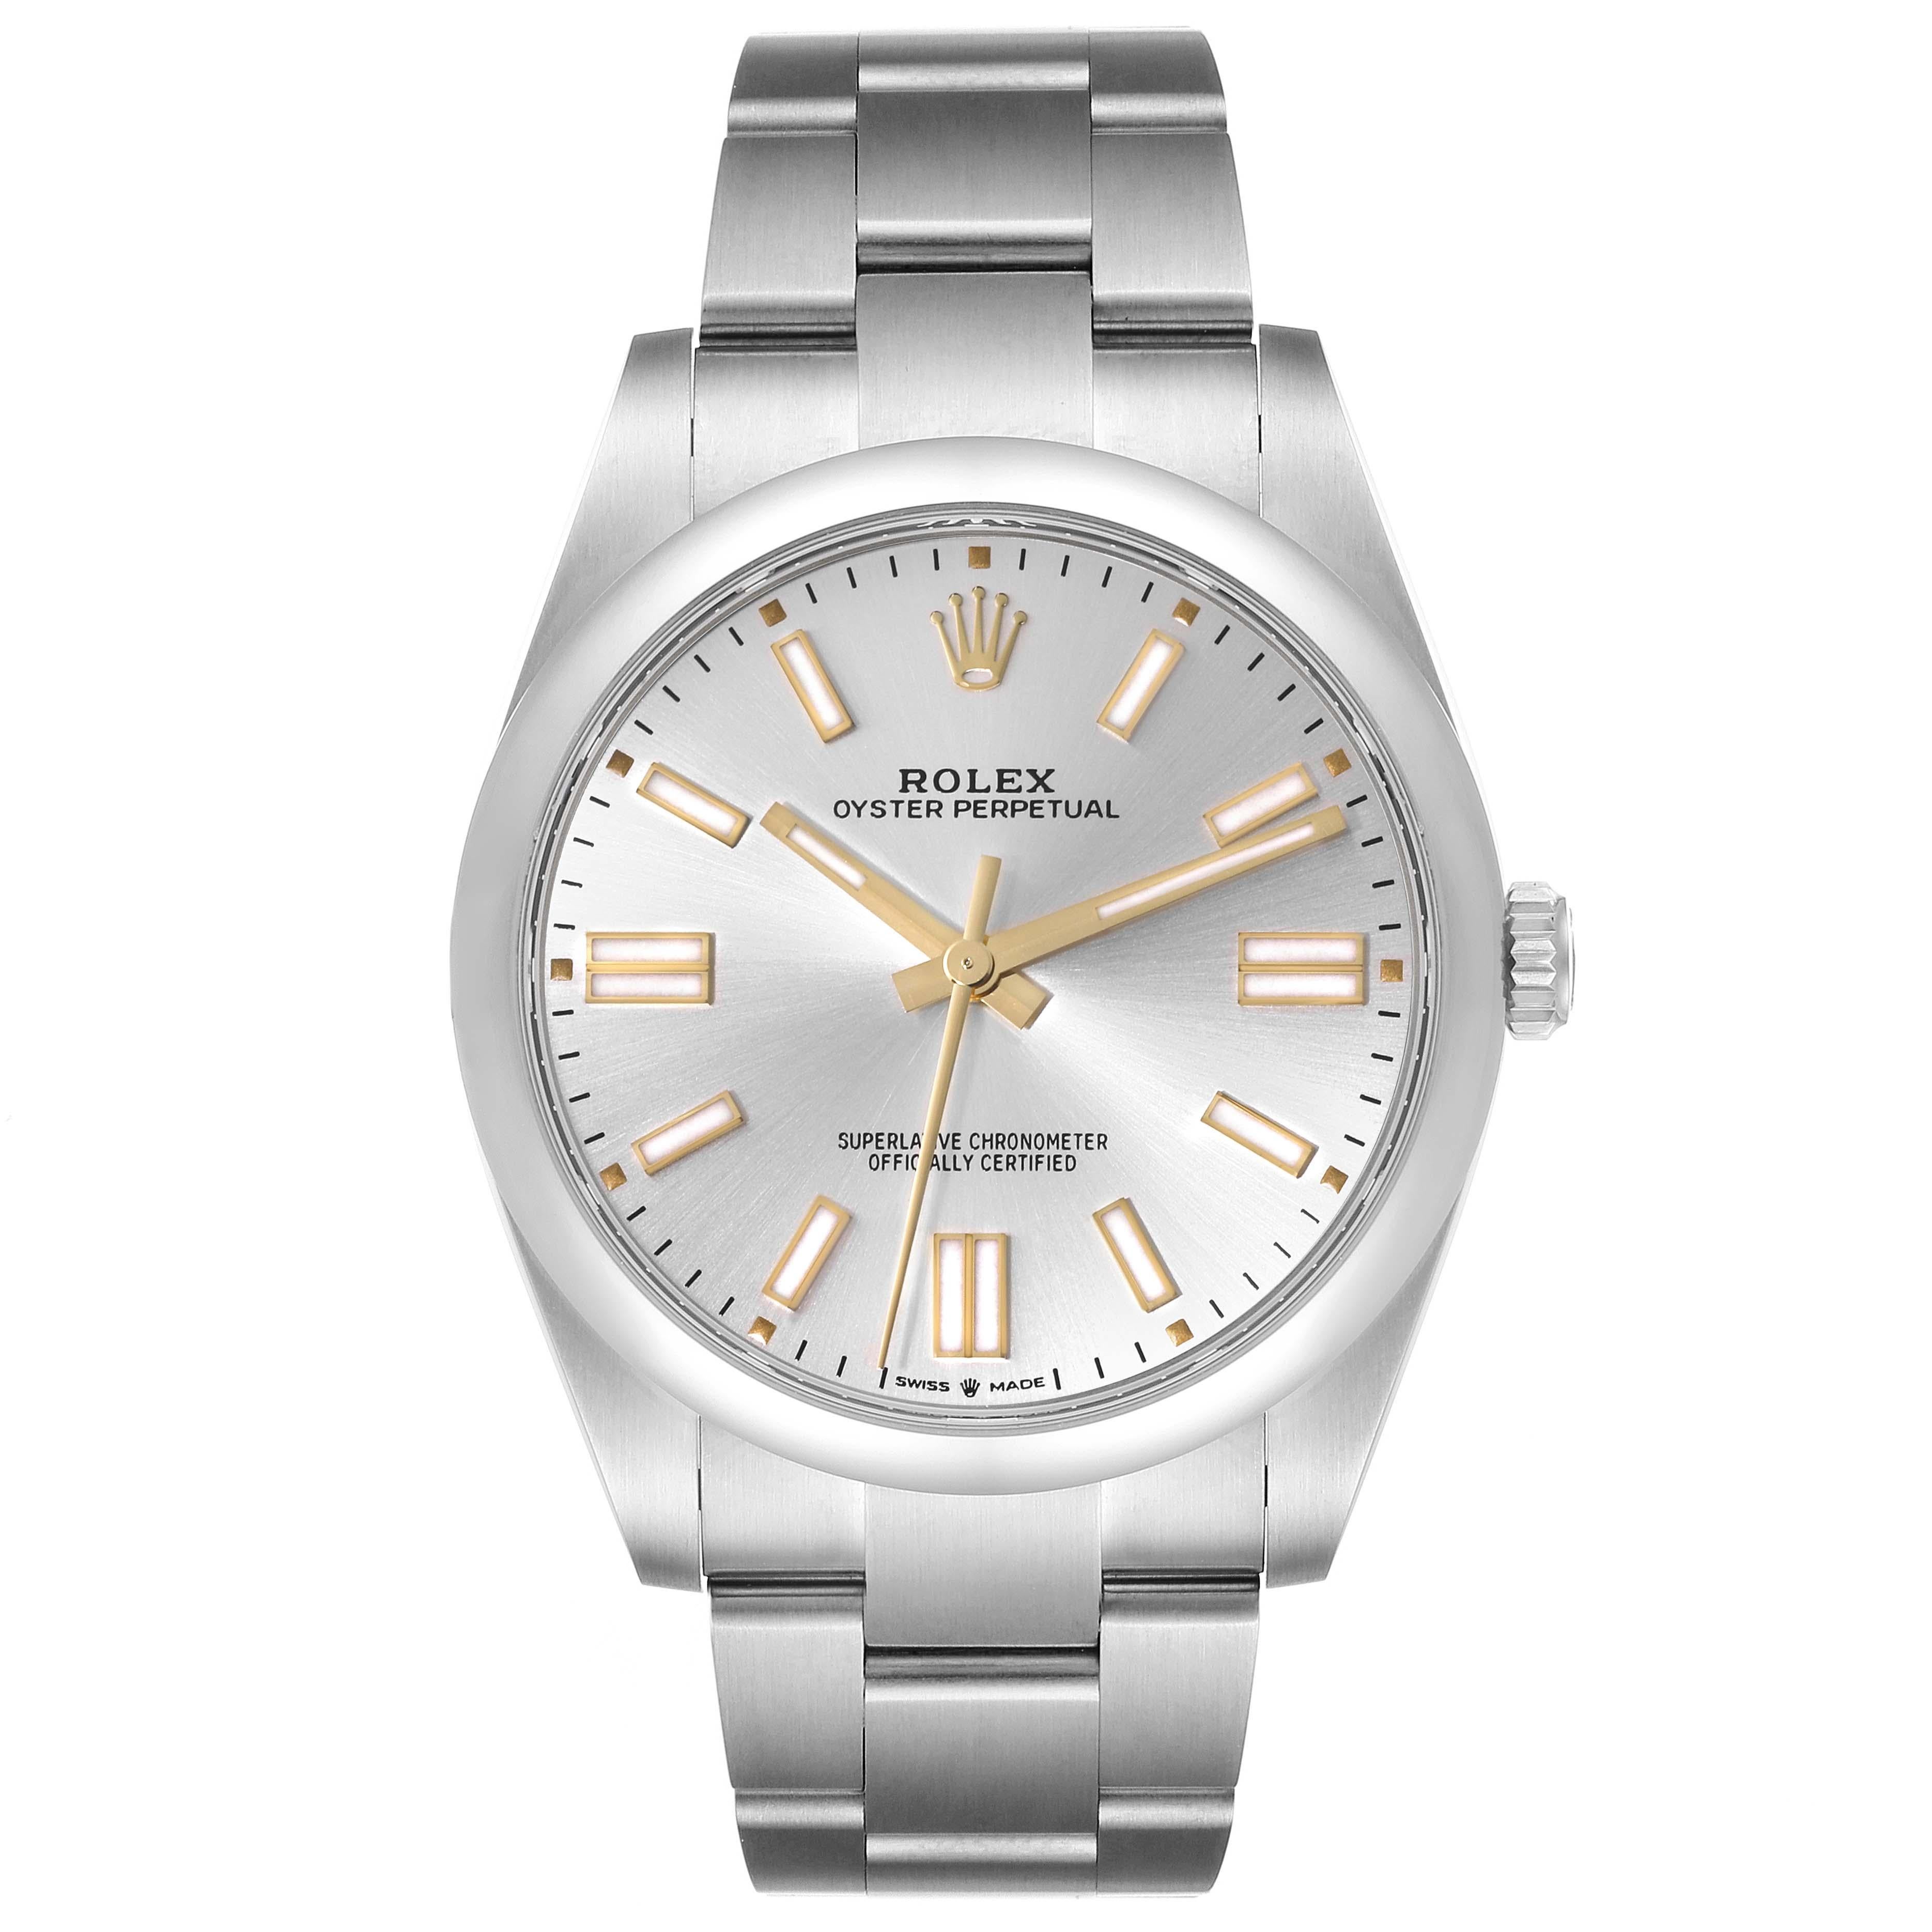 Rolex Oyster Perpetual 41 Silver Dial Steel Mens Watch 124300 Unworn. Officially certified chronometer automatic self-winding movement. Stainless steel case 41 mm in diameter. Rolex logo on the crown. Stainless steel smooth bezel. Scratch resistant